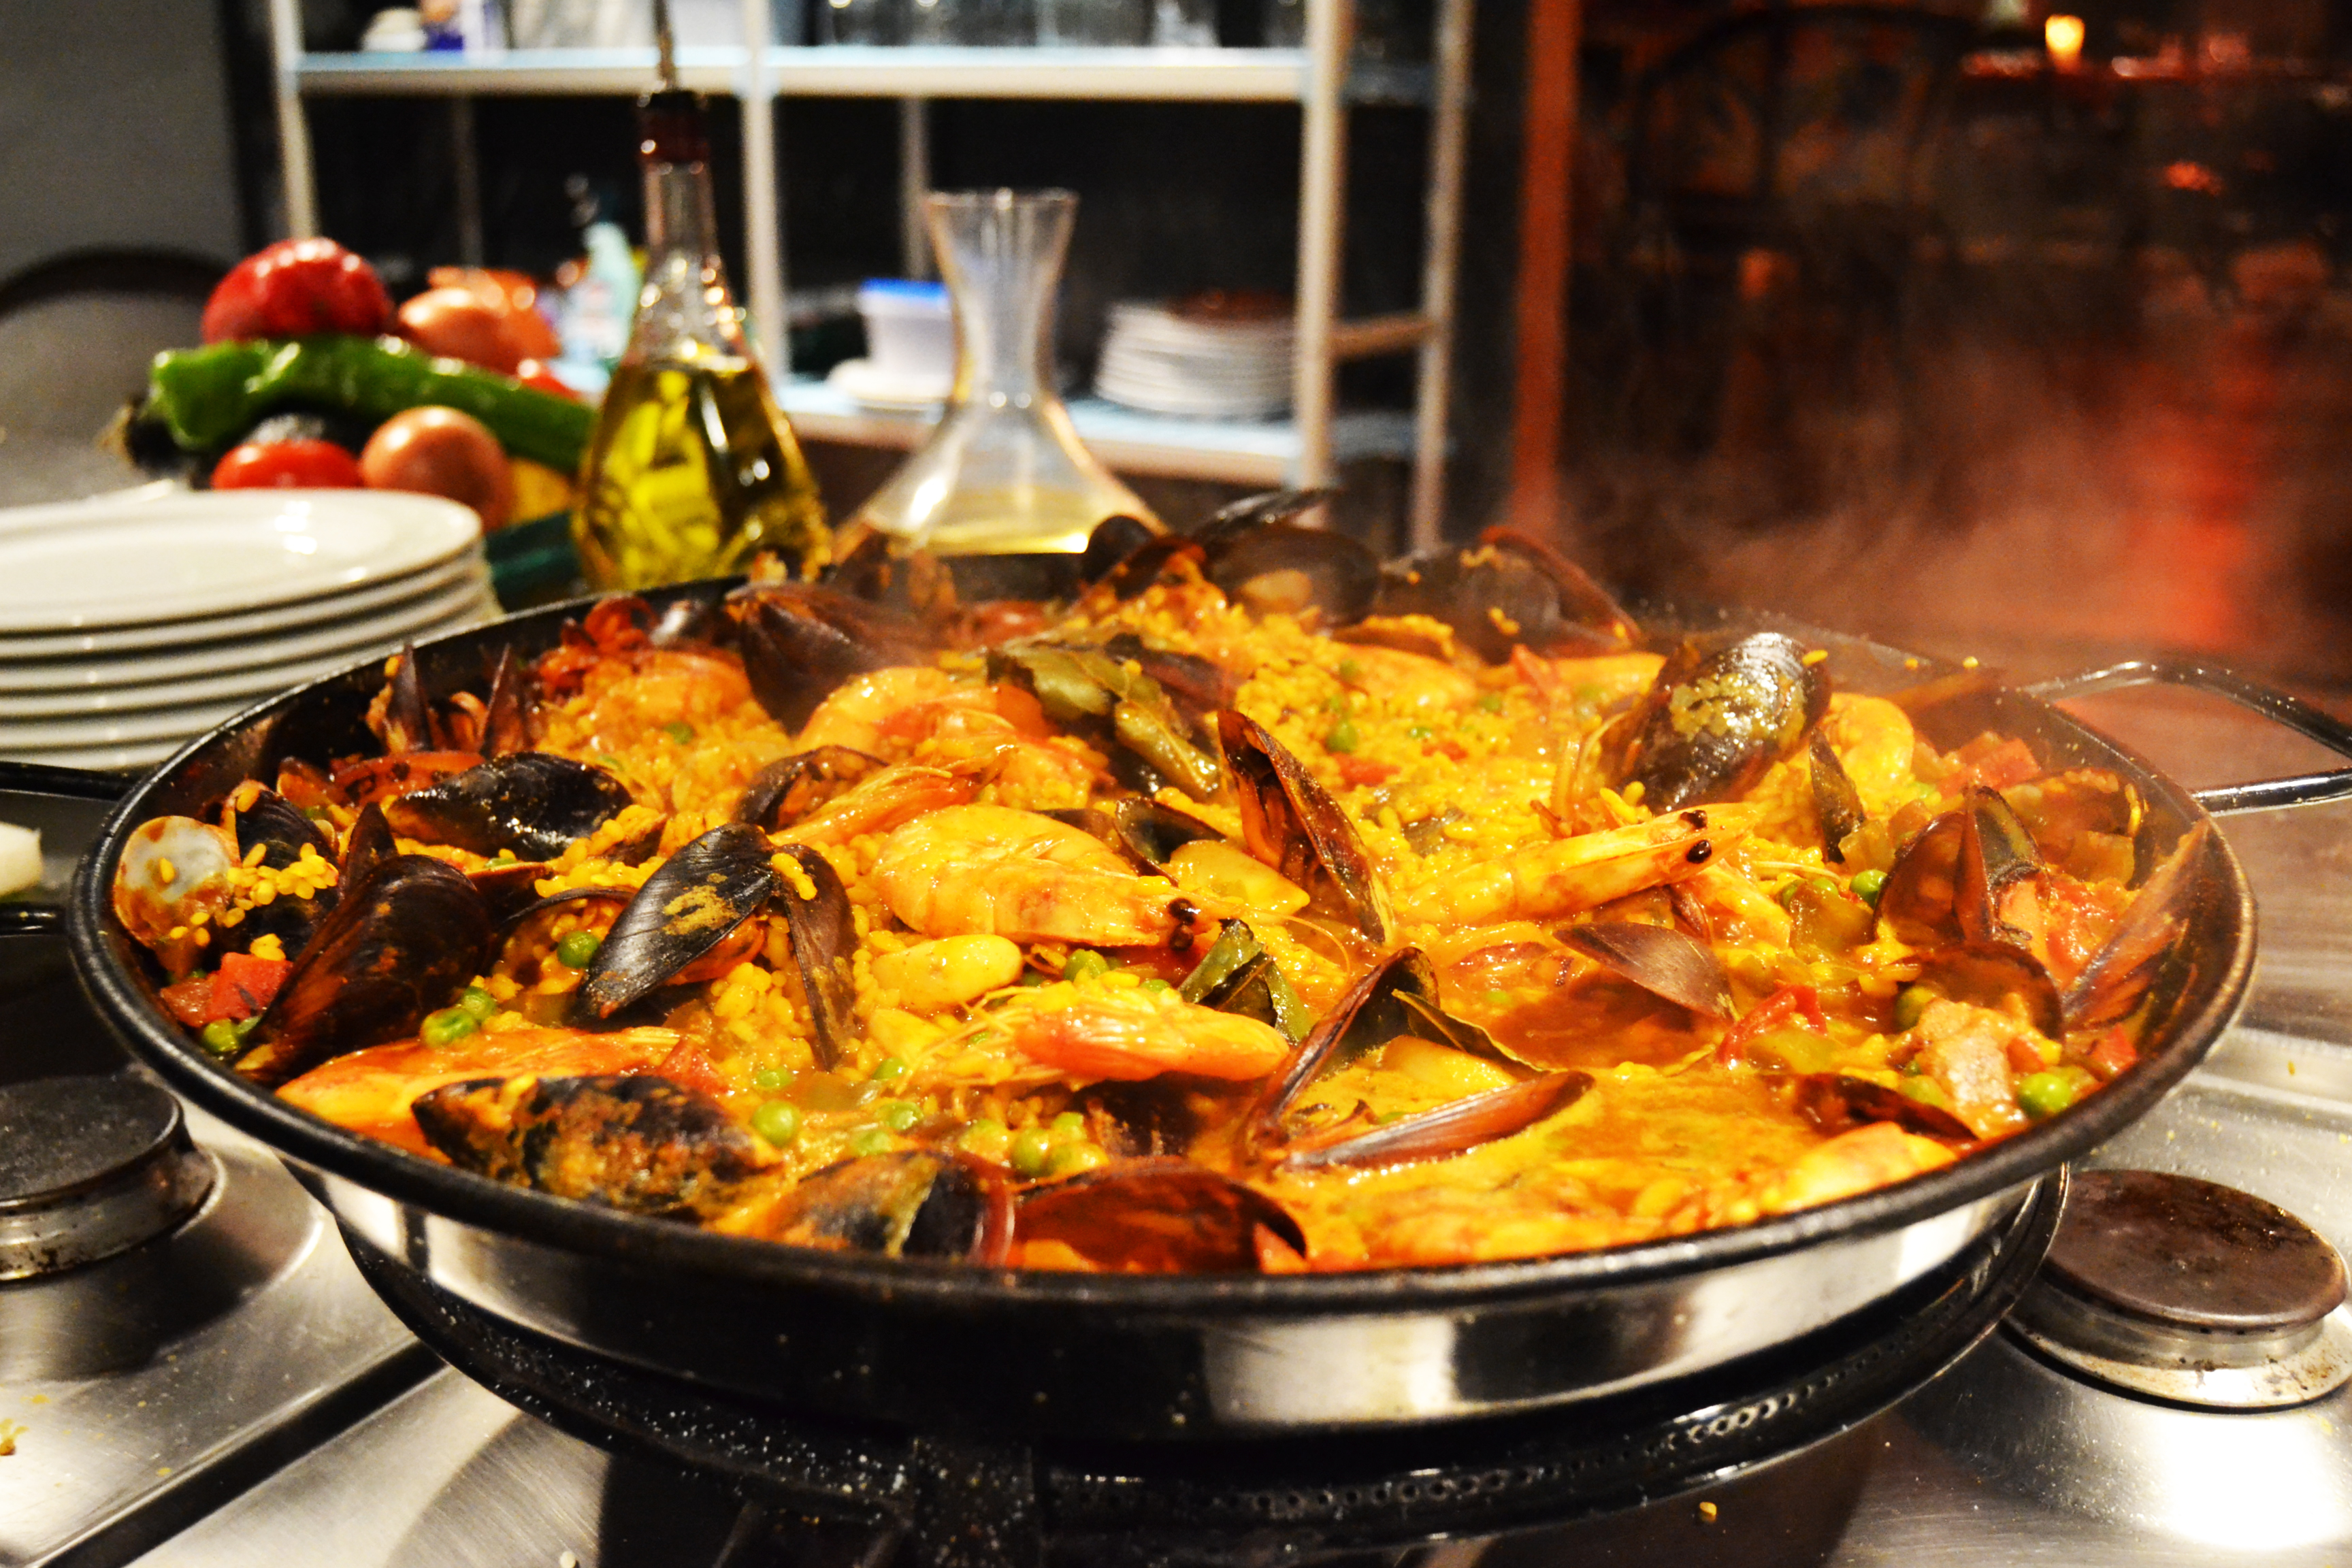 Spanish Cooking Experience - All The Flavours Of Spain Unite!